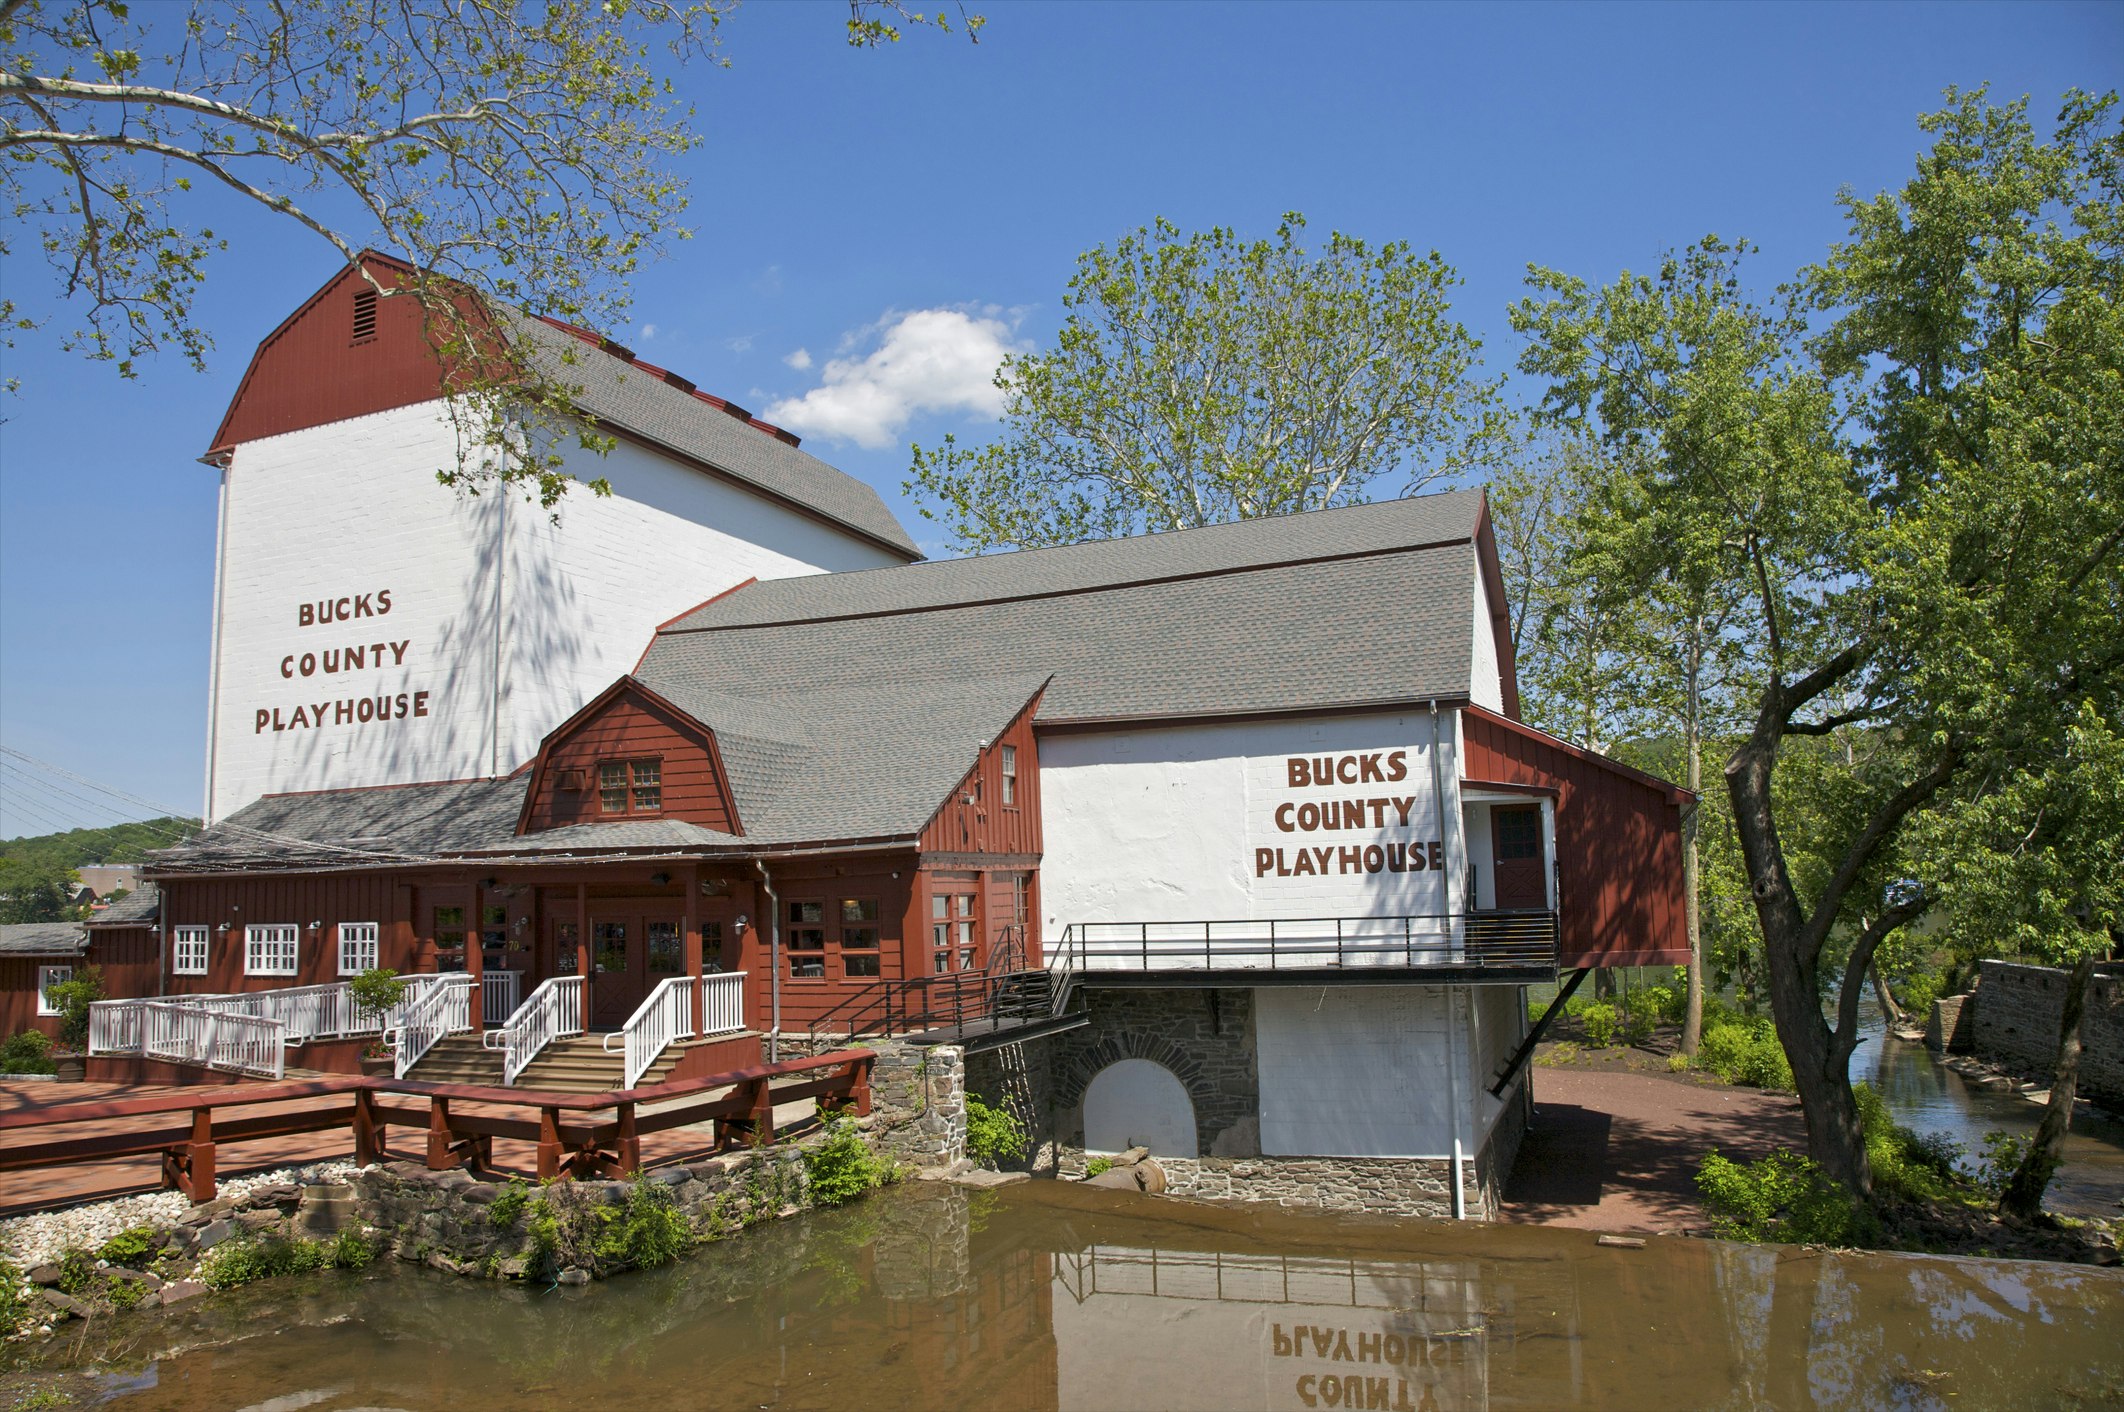 Barn-like red and white theatre near water is the Bucks County Playhouse, New Hope, Bucks County, Pennsylvania, USA. State Theater of Pennsylvania.